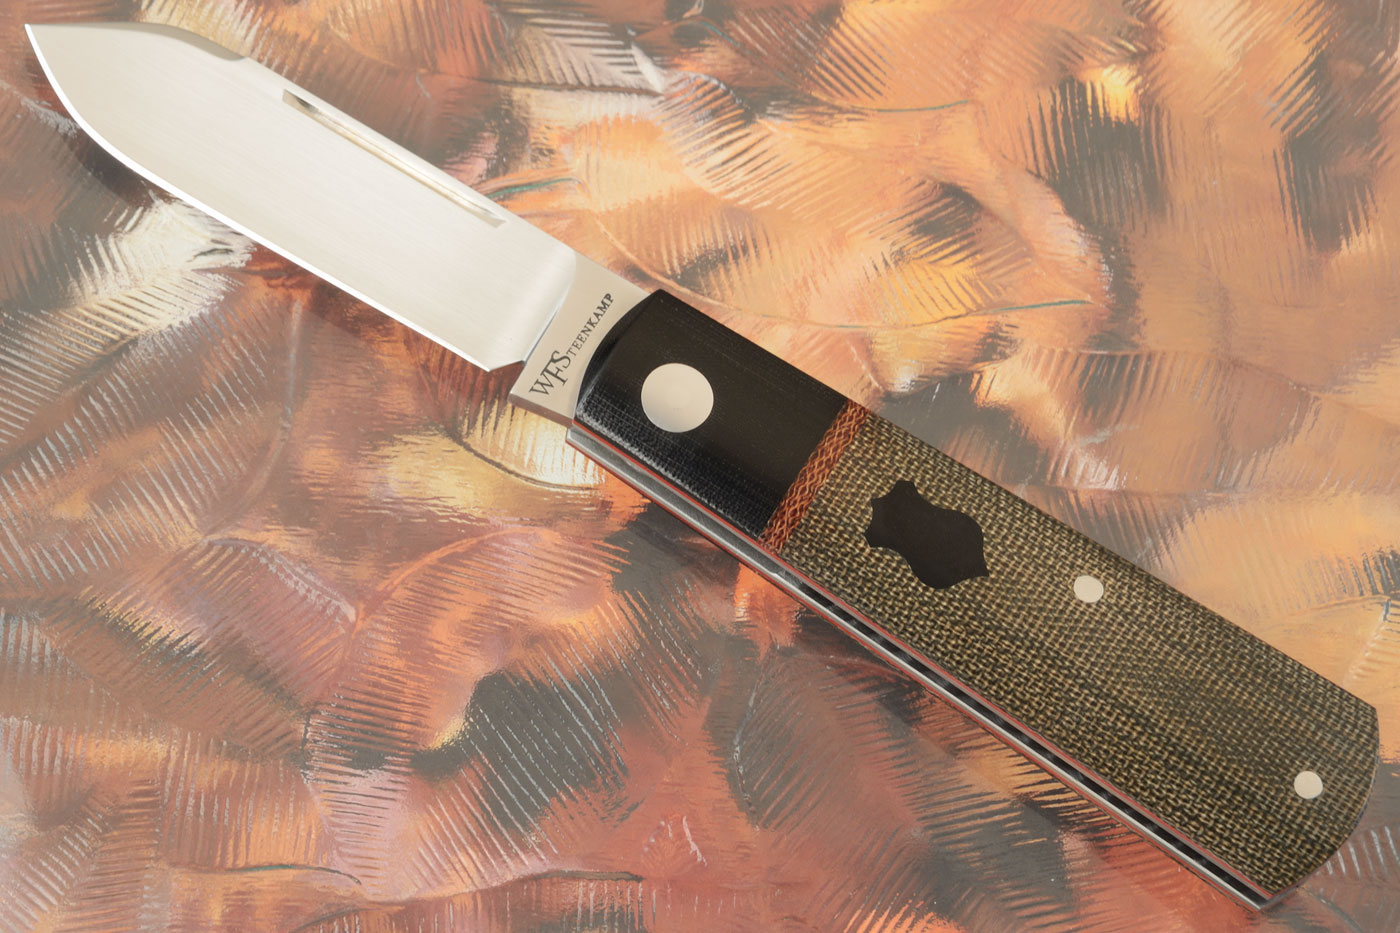 Barlow Slipjoint with Green Canvas and Black Micarta